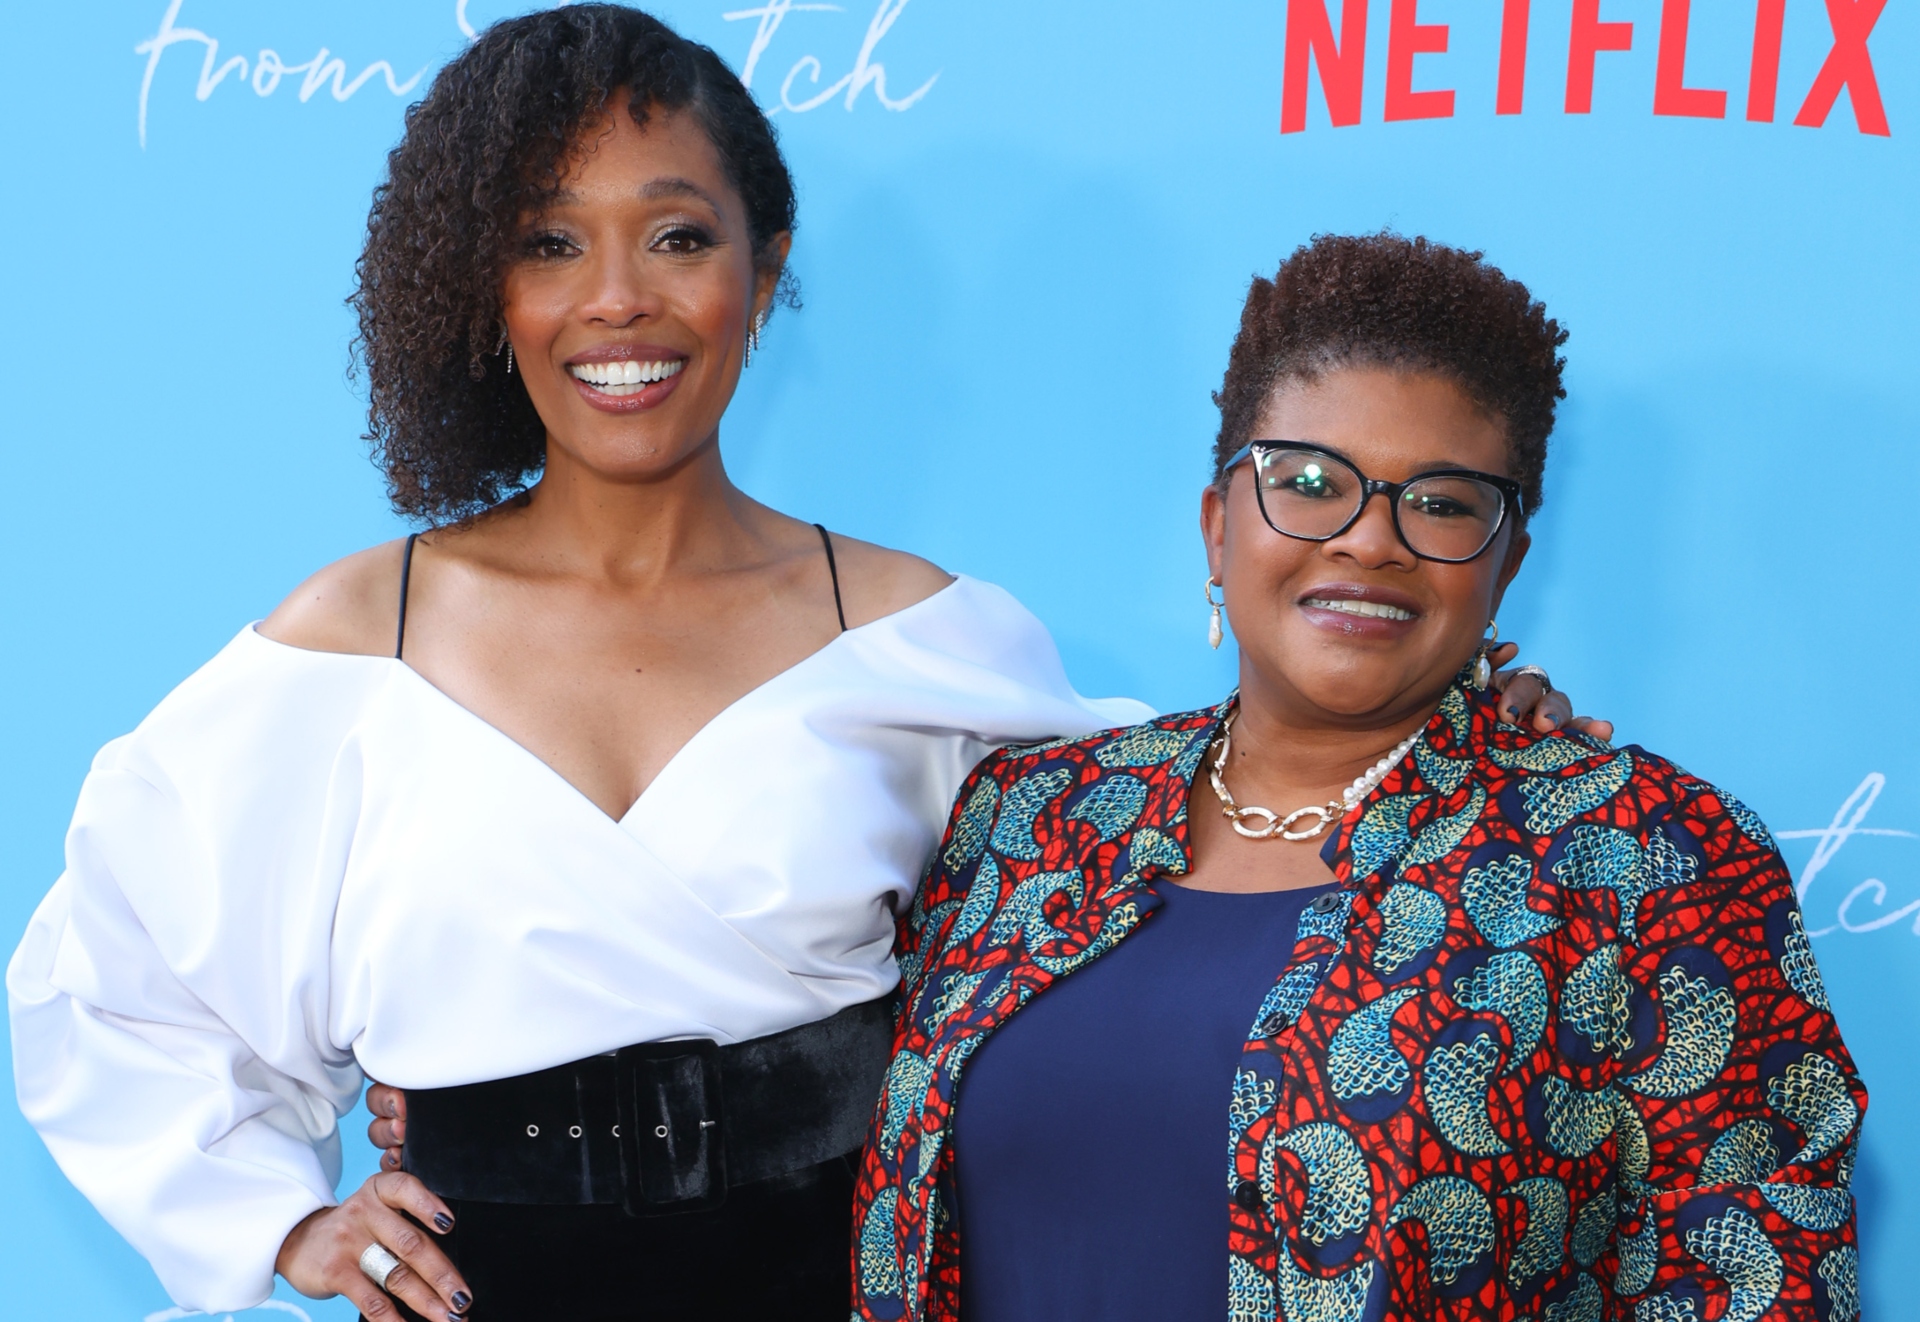 Tembi Locke and her sister Attica Locke collaborated on the Netflix series based on Tembi's memoir, From Scratch.